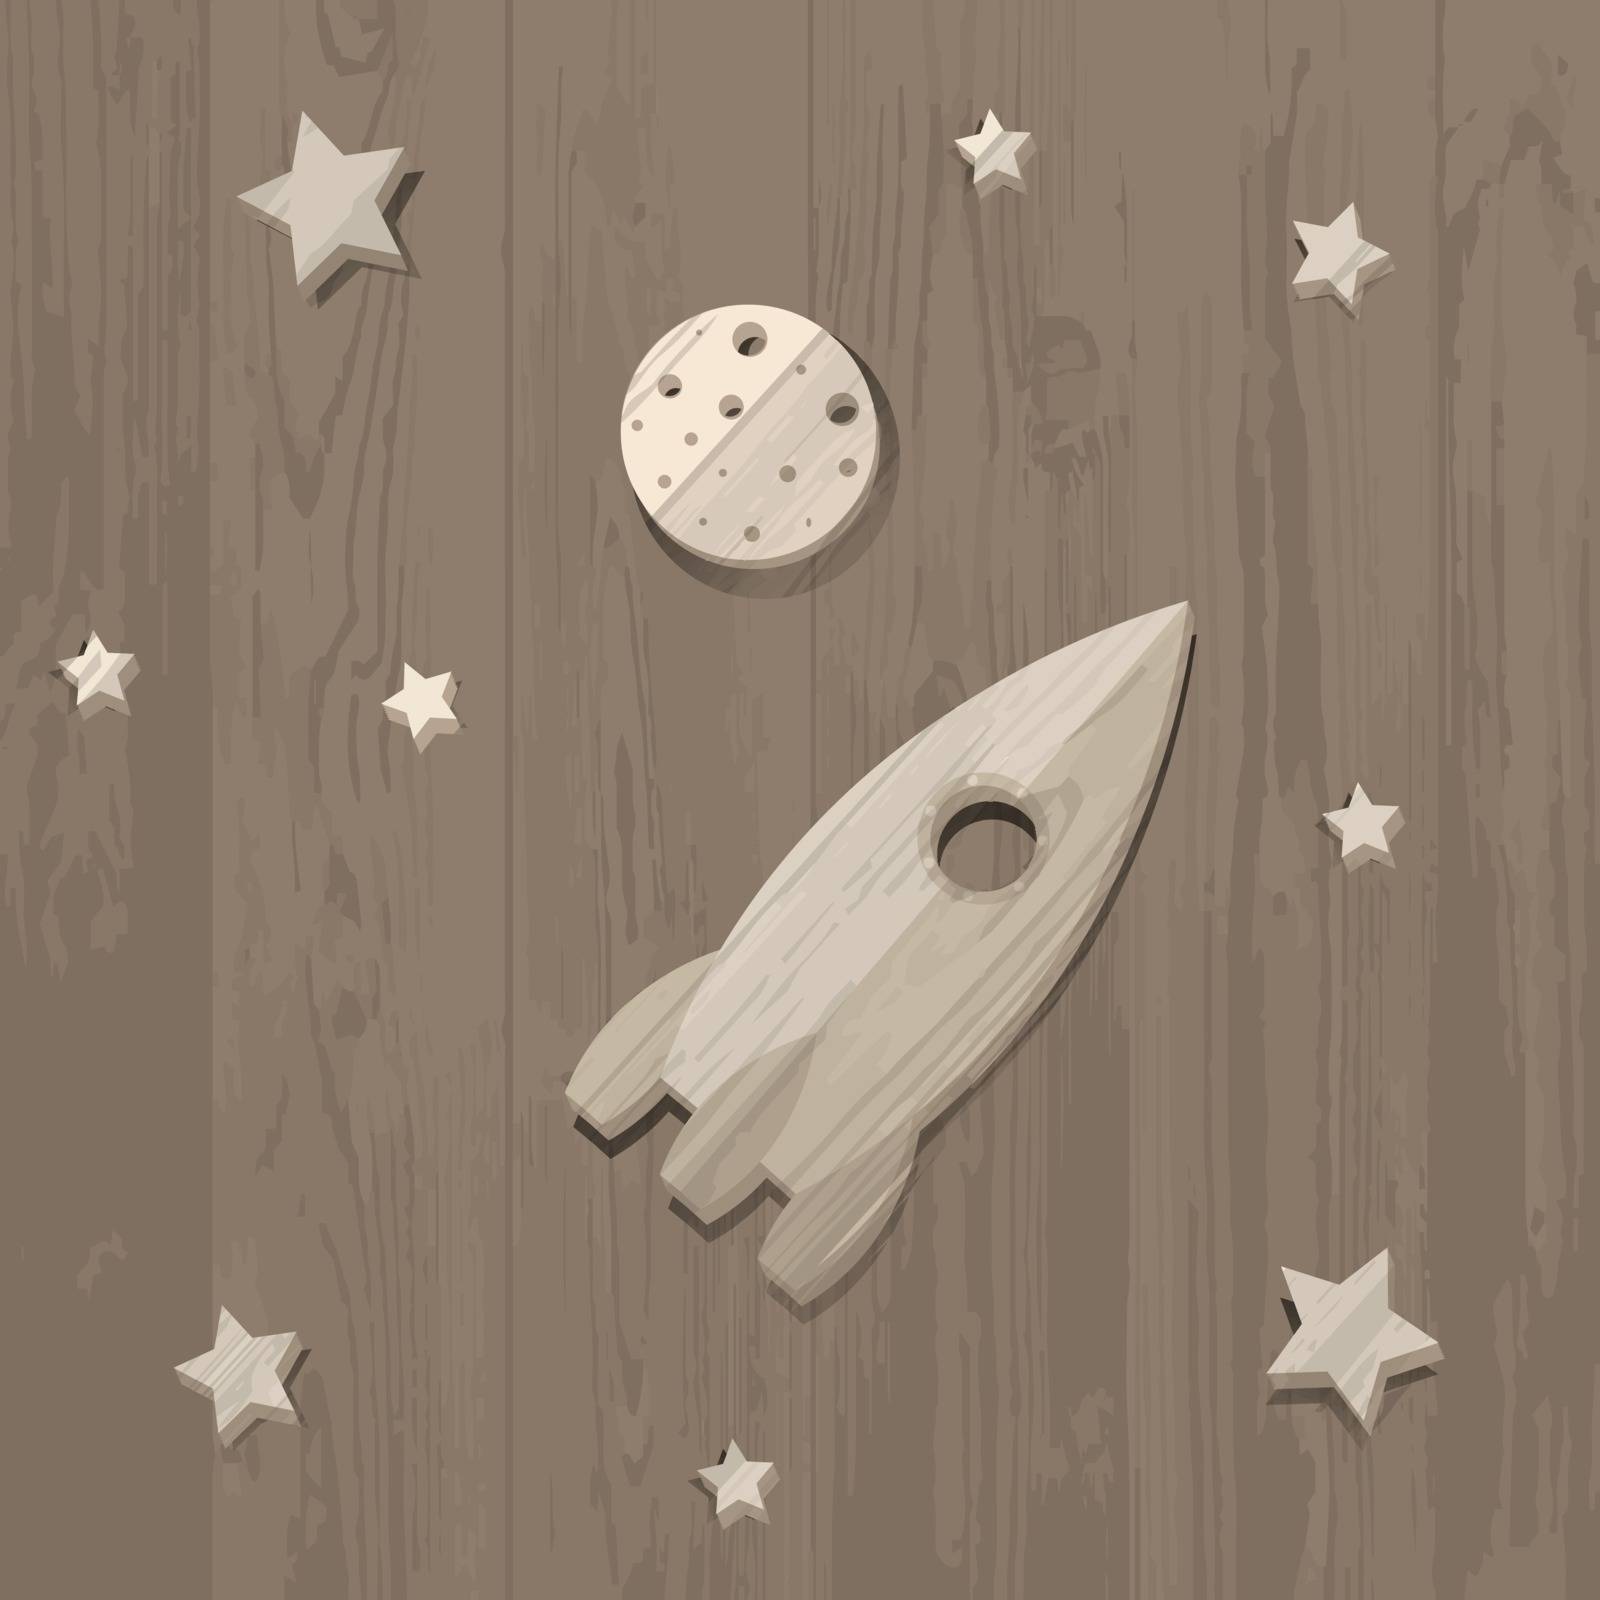 wooden rocket, moon and stars on wooden background by Musjaka